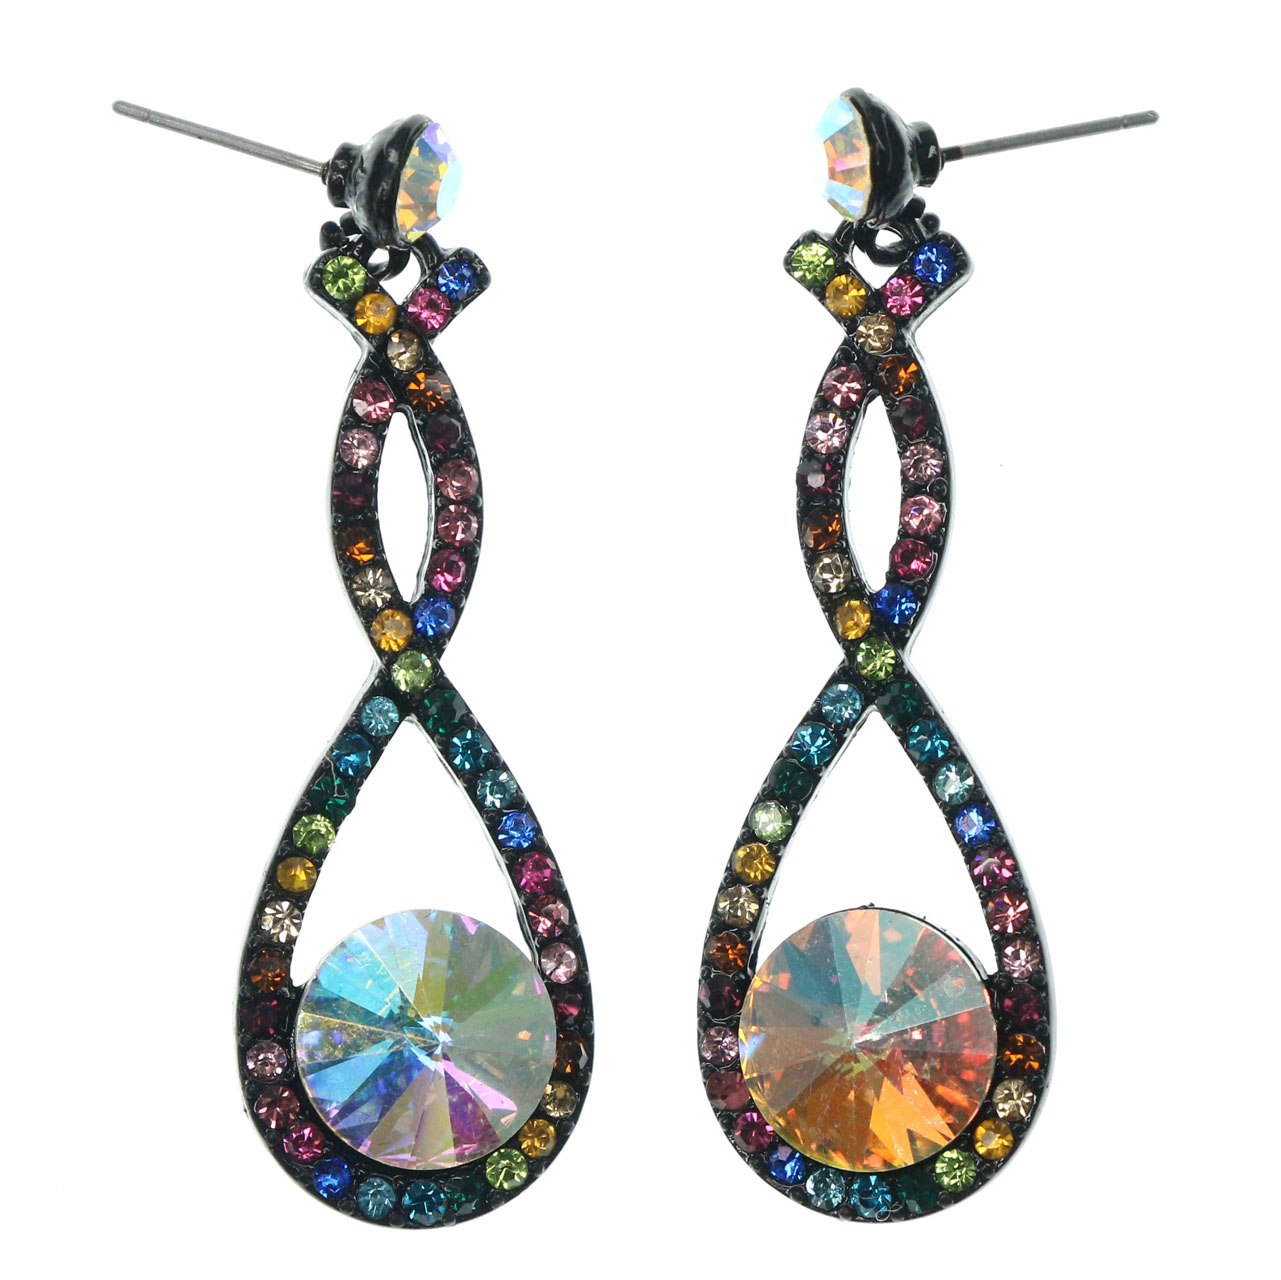 MI AMORE Black Dangle Earrings With Rainbow Colored Rhinestone Accents For Women TME550